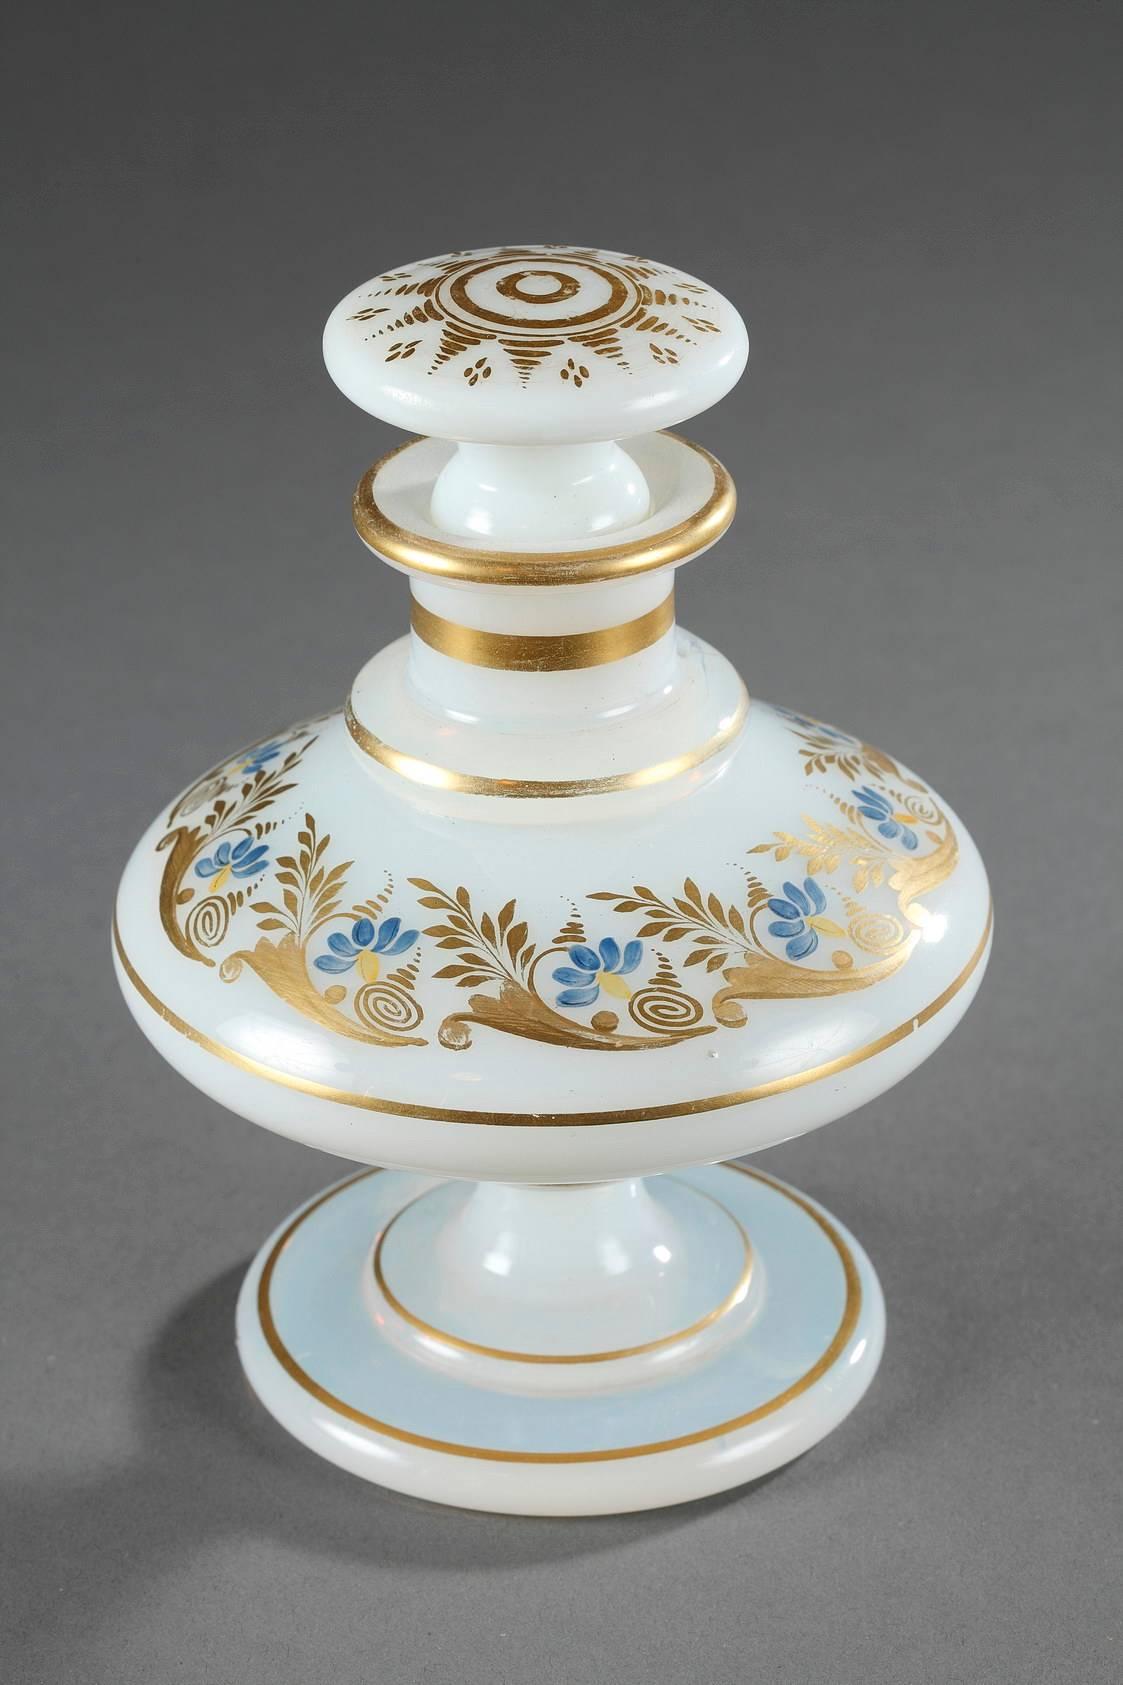 Restauration Early 19th Century Charles X Opaline perfume bottle with Desvignes Decoration For Sale